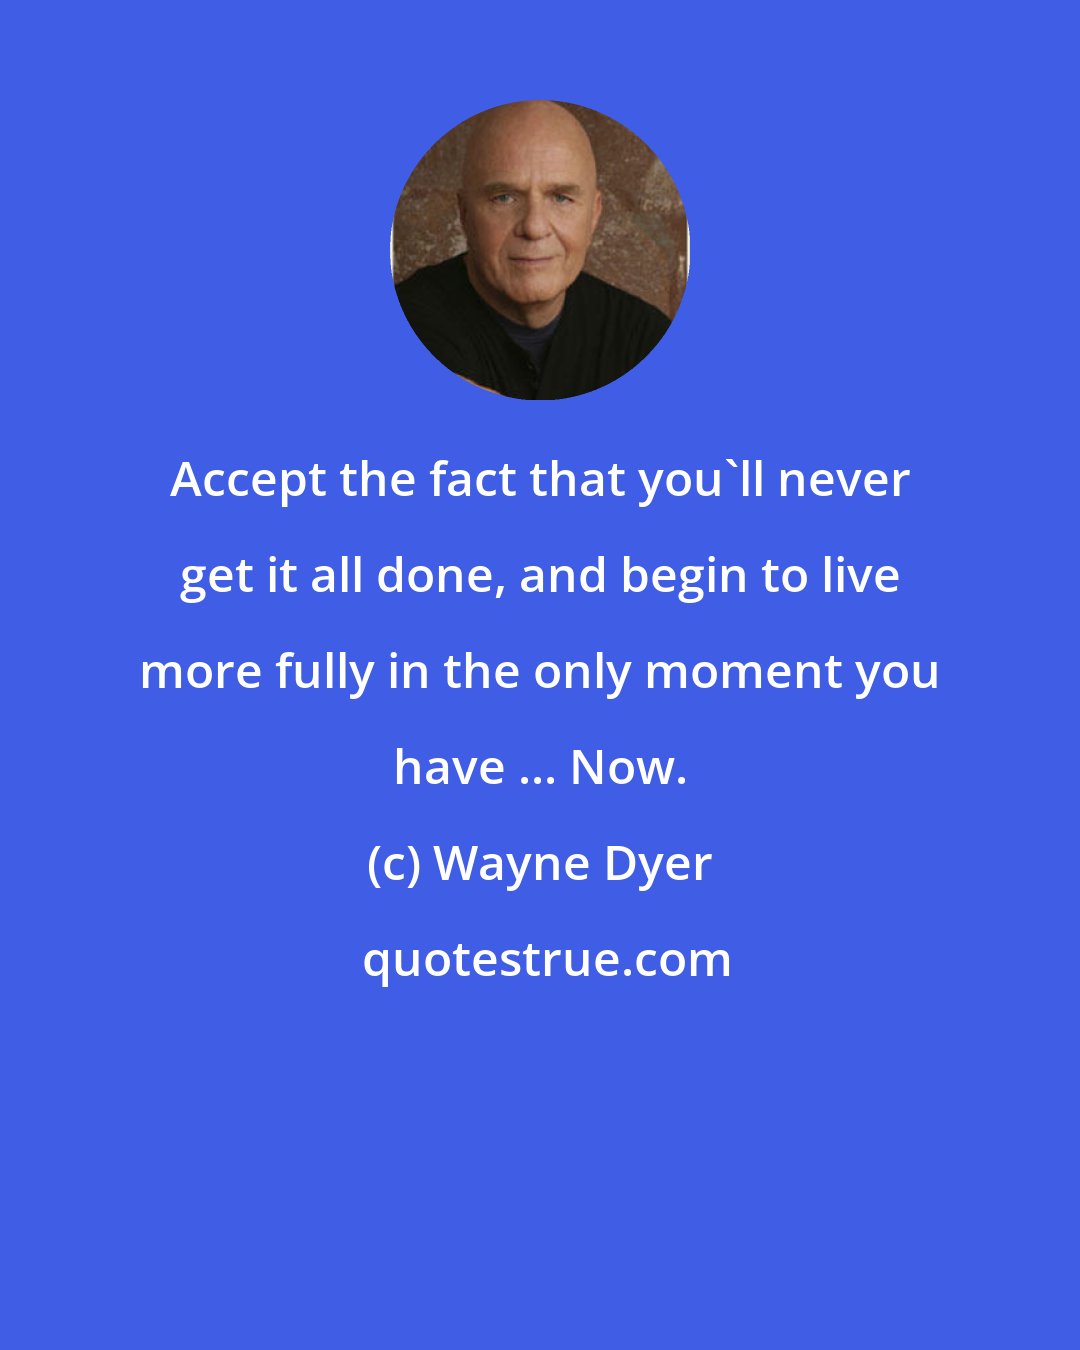 Wayne Dyer: Accept the fact that you'll never get it all done, and begin to live more fully in the only moment you have ... Now.